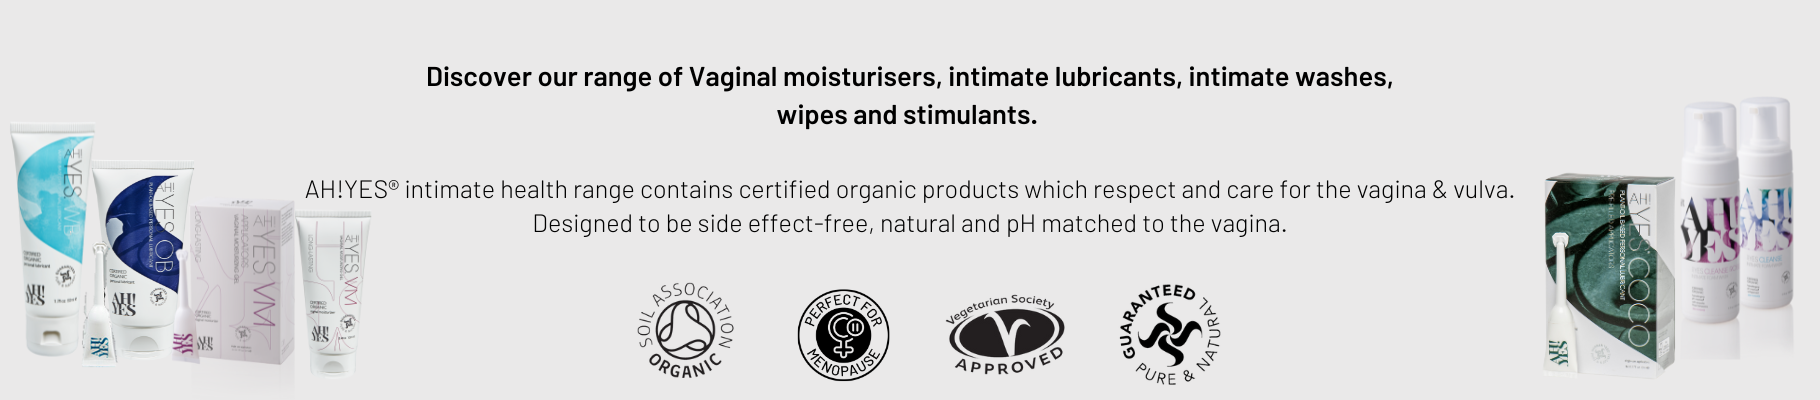 Discover our range of Vaginal moisturisers, intimate lubricants, intimate washes, wipes and stimulants. AH!YES® intimate health range contains certified organic products which respect and care for the vagina & vulva. Designed to be side effect-free, natural and pH matched to the vagina.